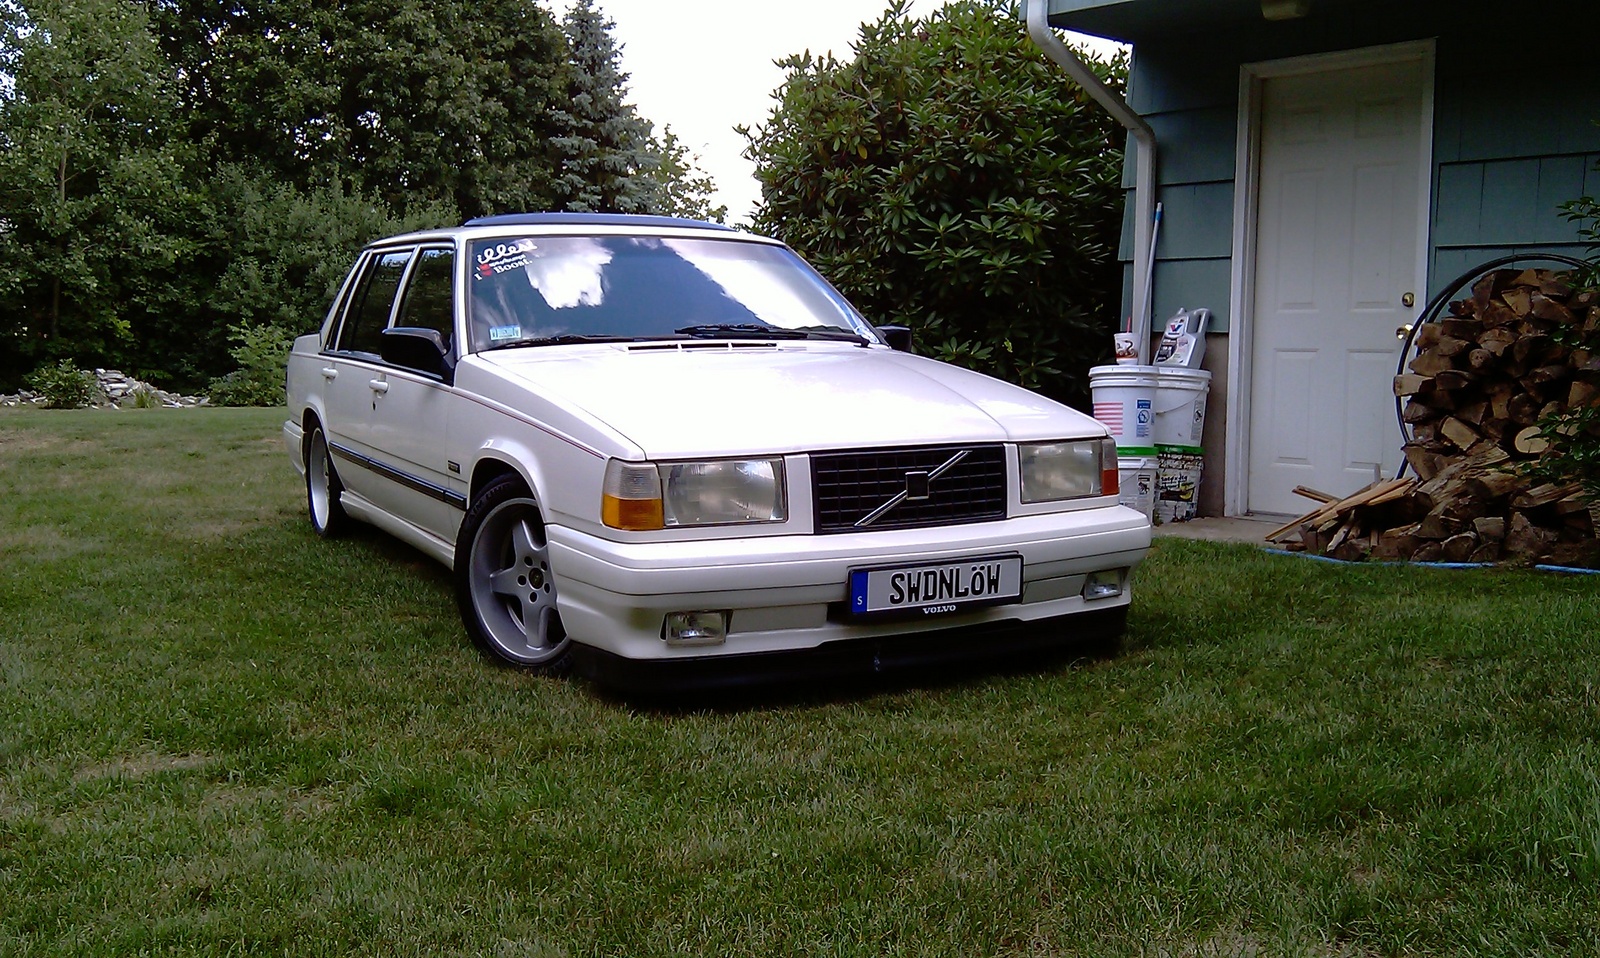 volvo 740 turbo related images,1 to 50 - Zuoda Images